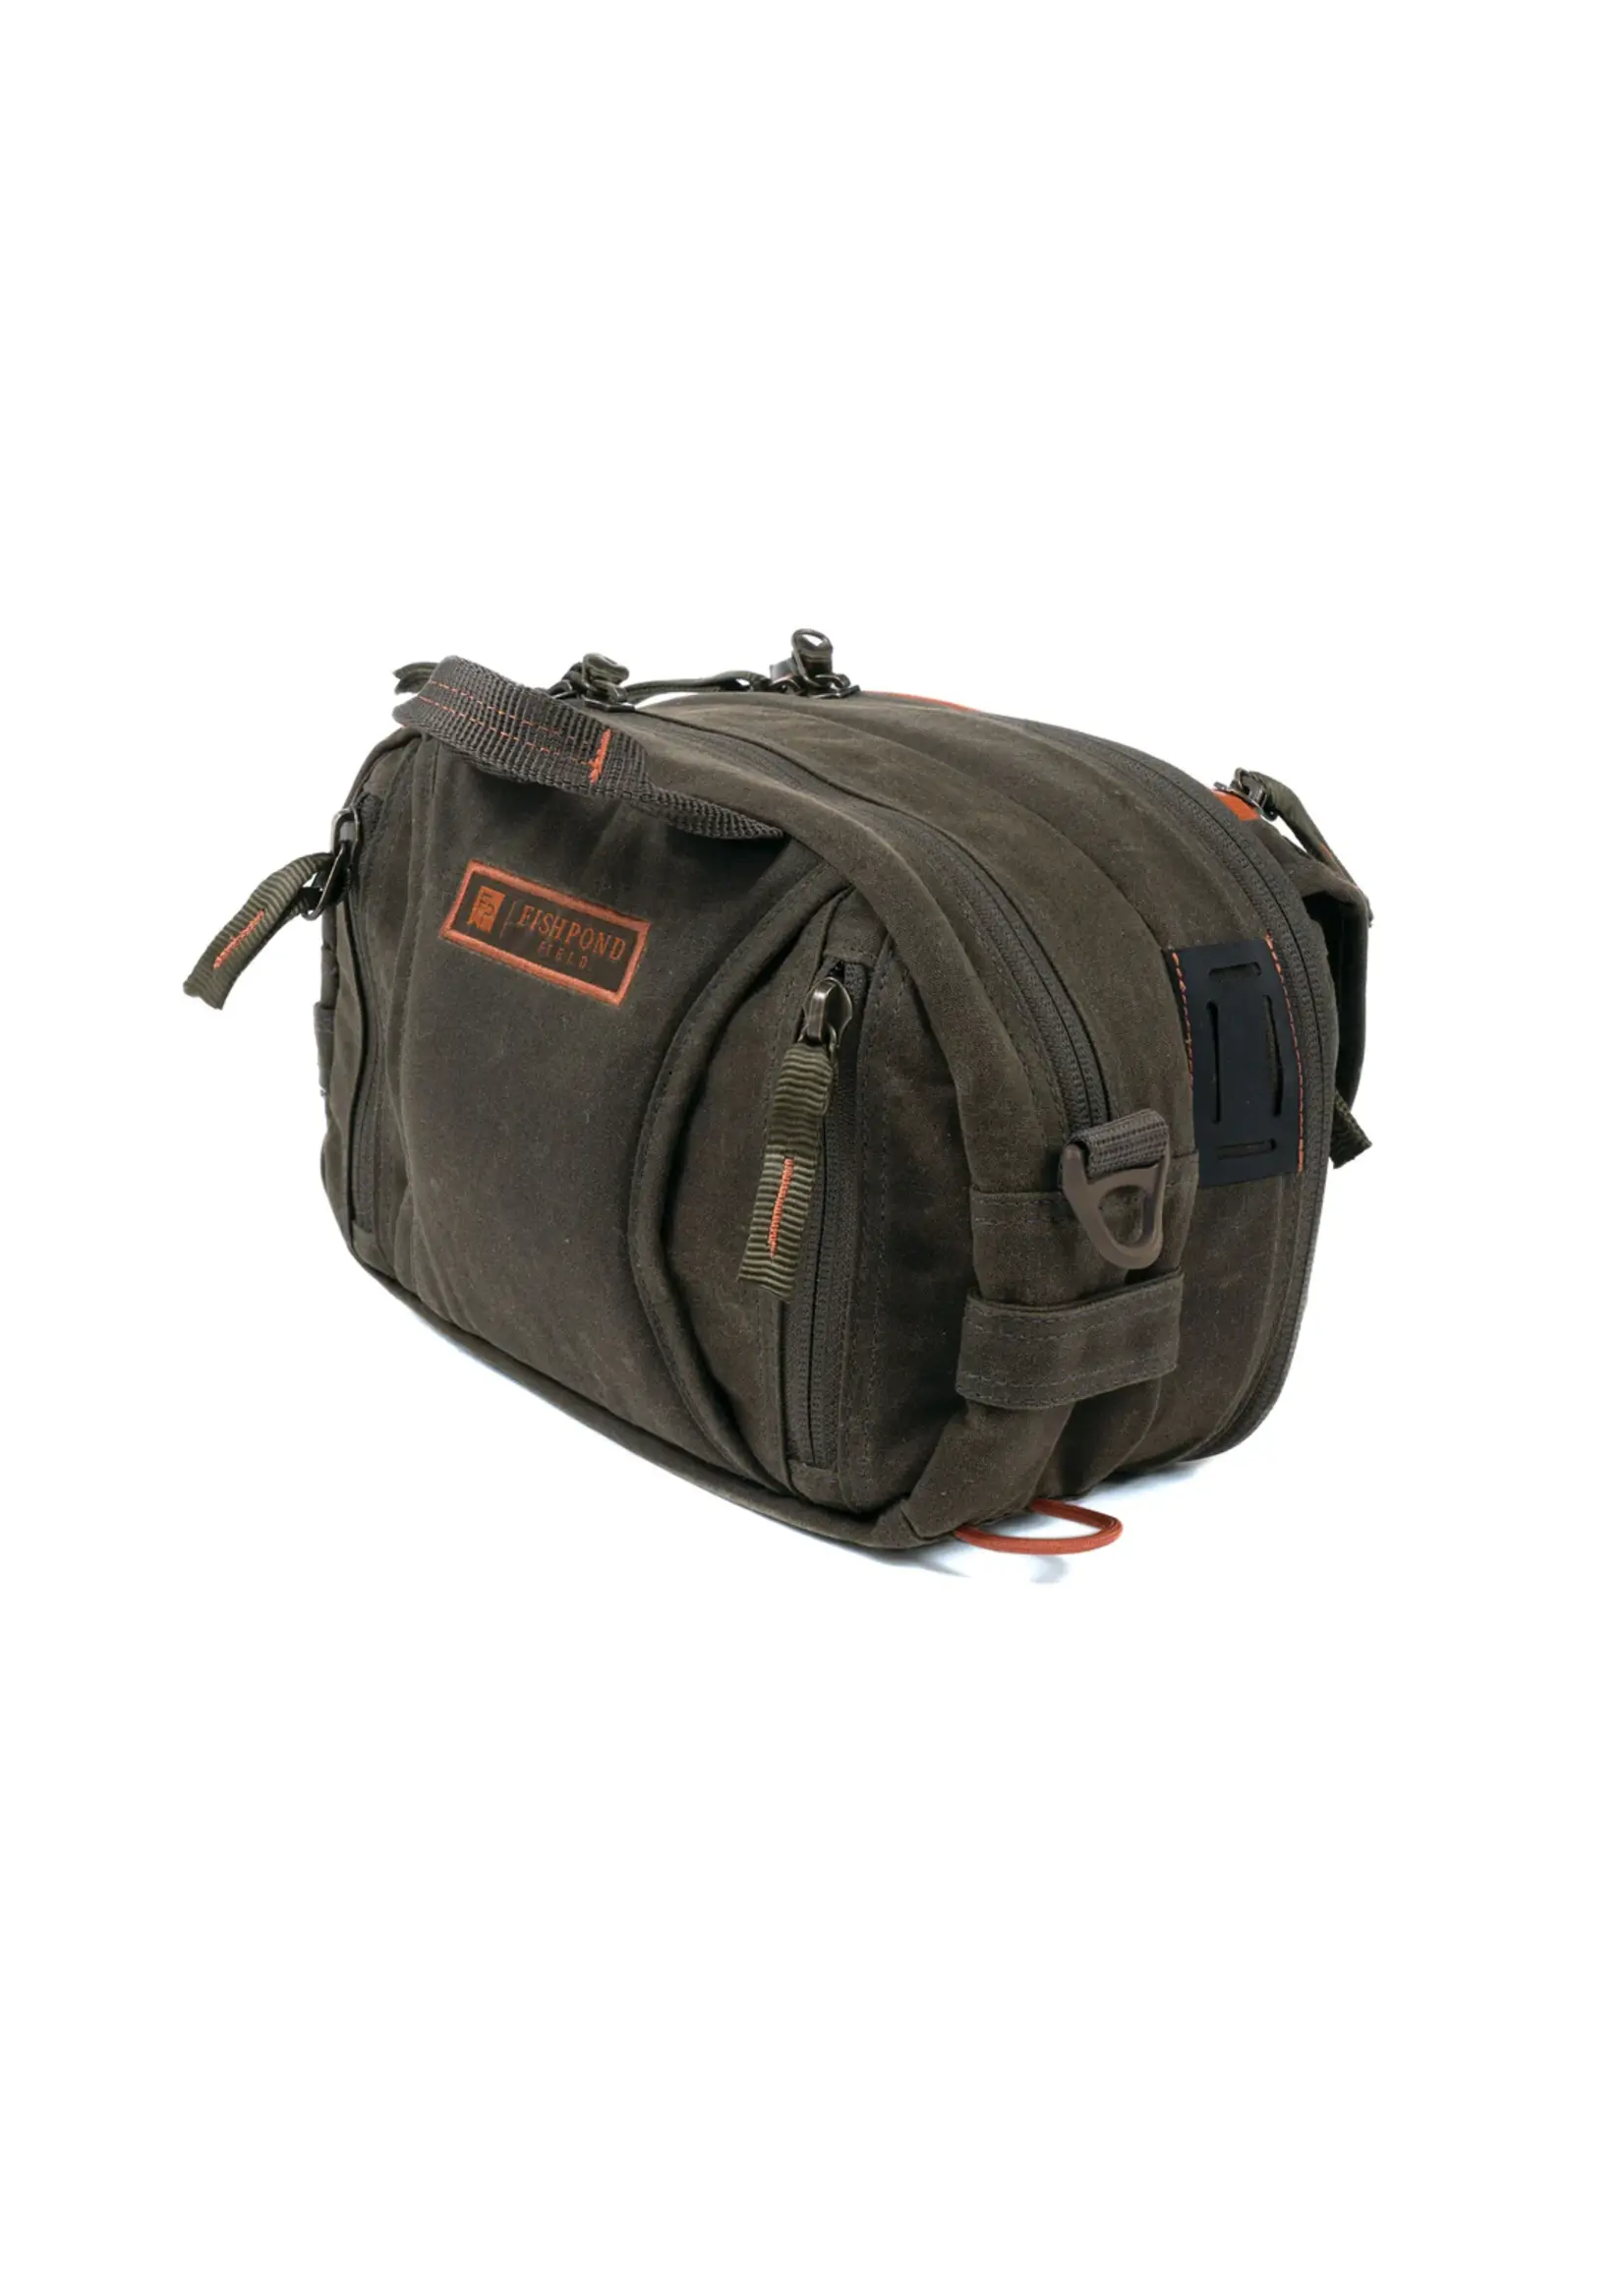 Fishpond Fishpond Blue River Waxed Canvas Chest/Lumbar Pack